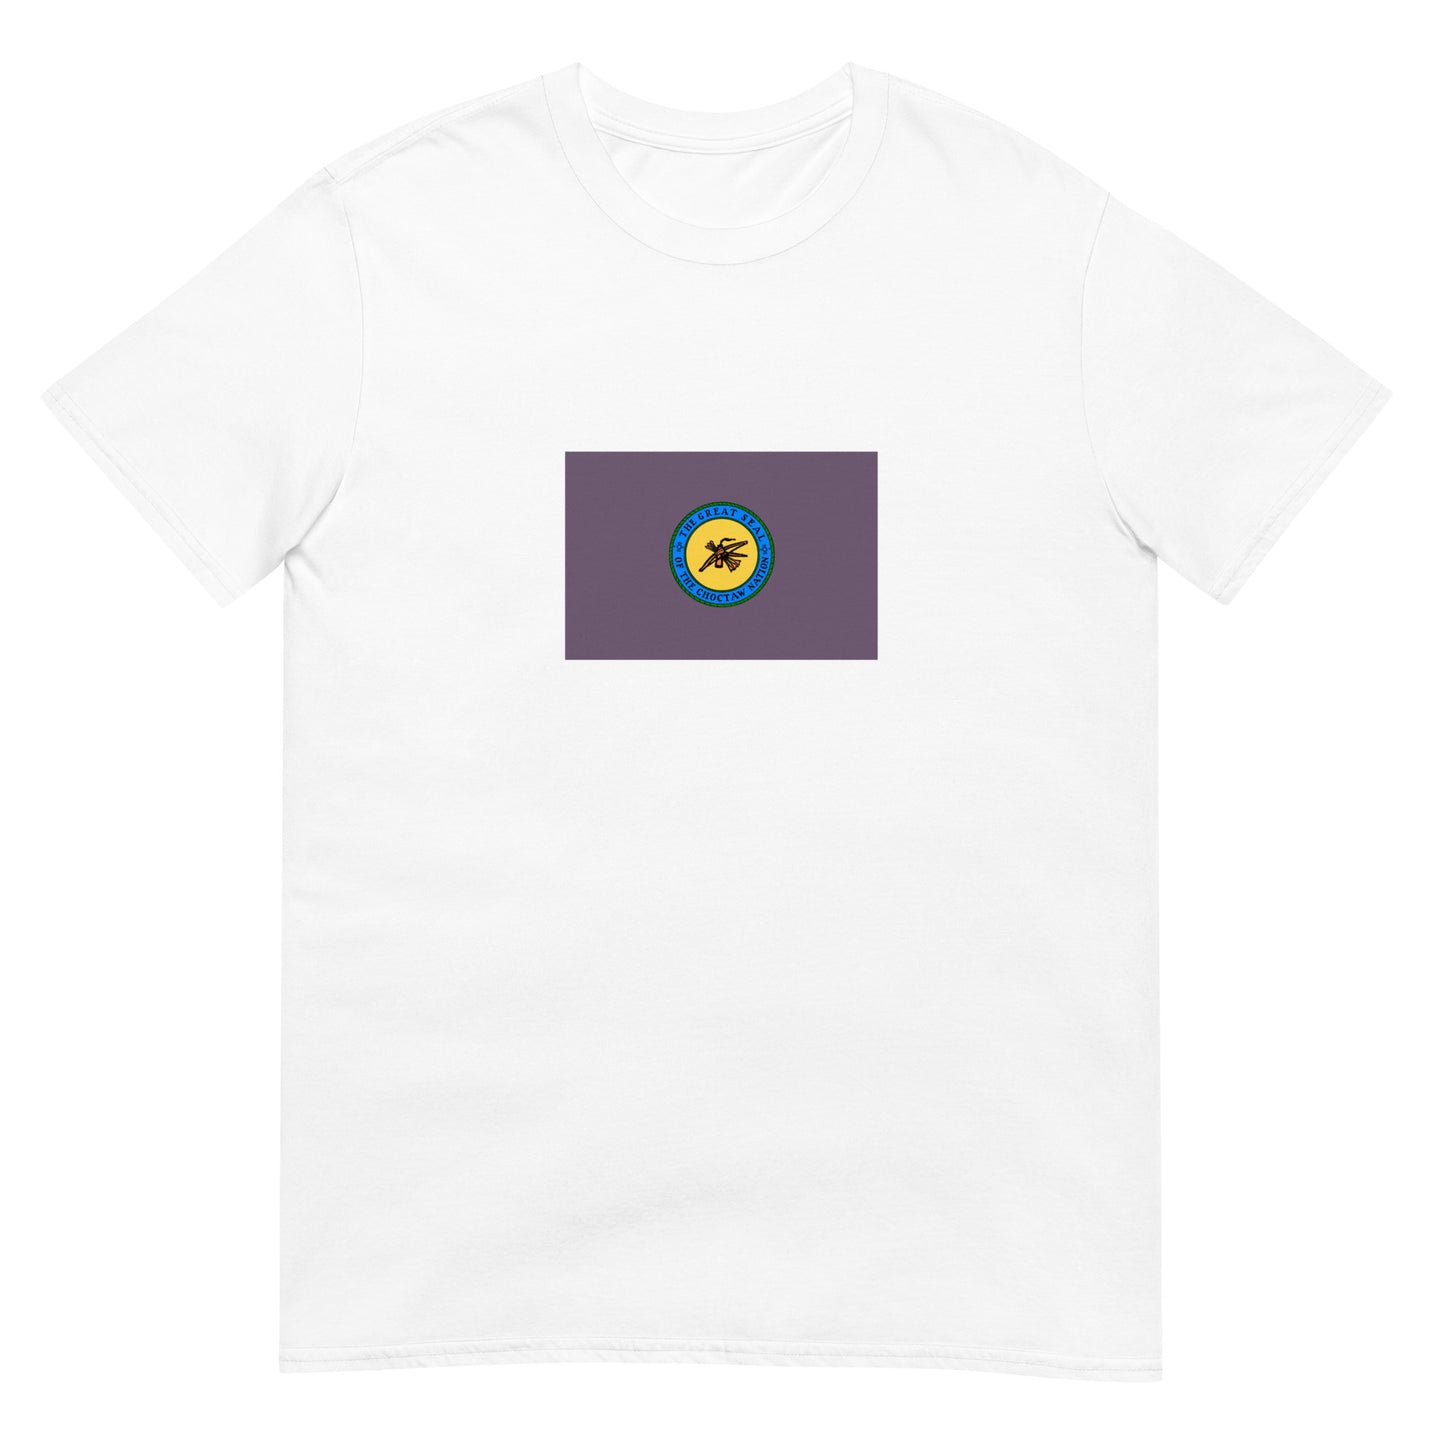 USA - Choctaw people | Native American Flag Interactive T-shirt